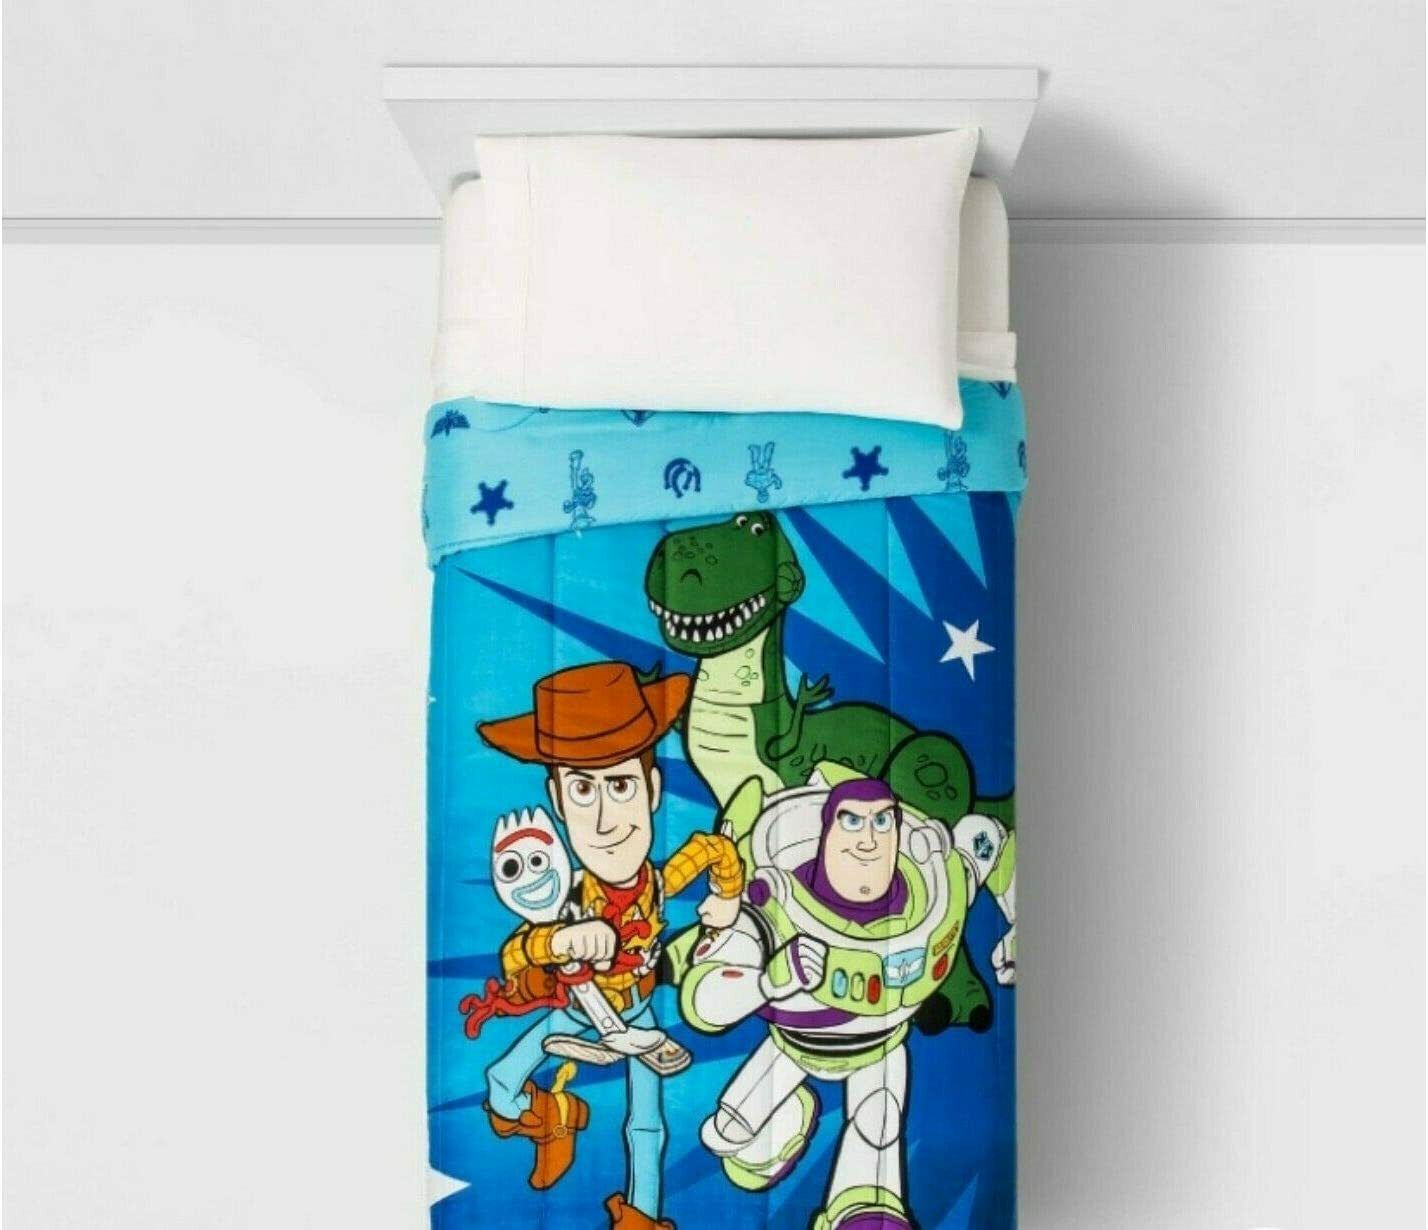 Toy Story 4 Glow In The Dark Bedding Comforter - Twin Size